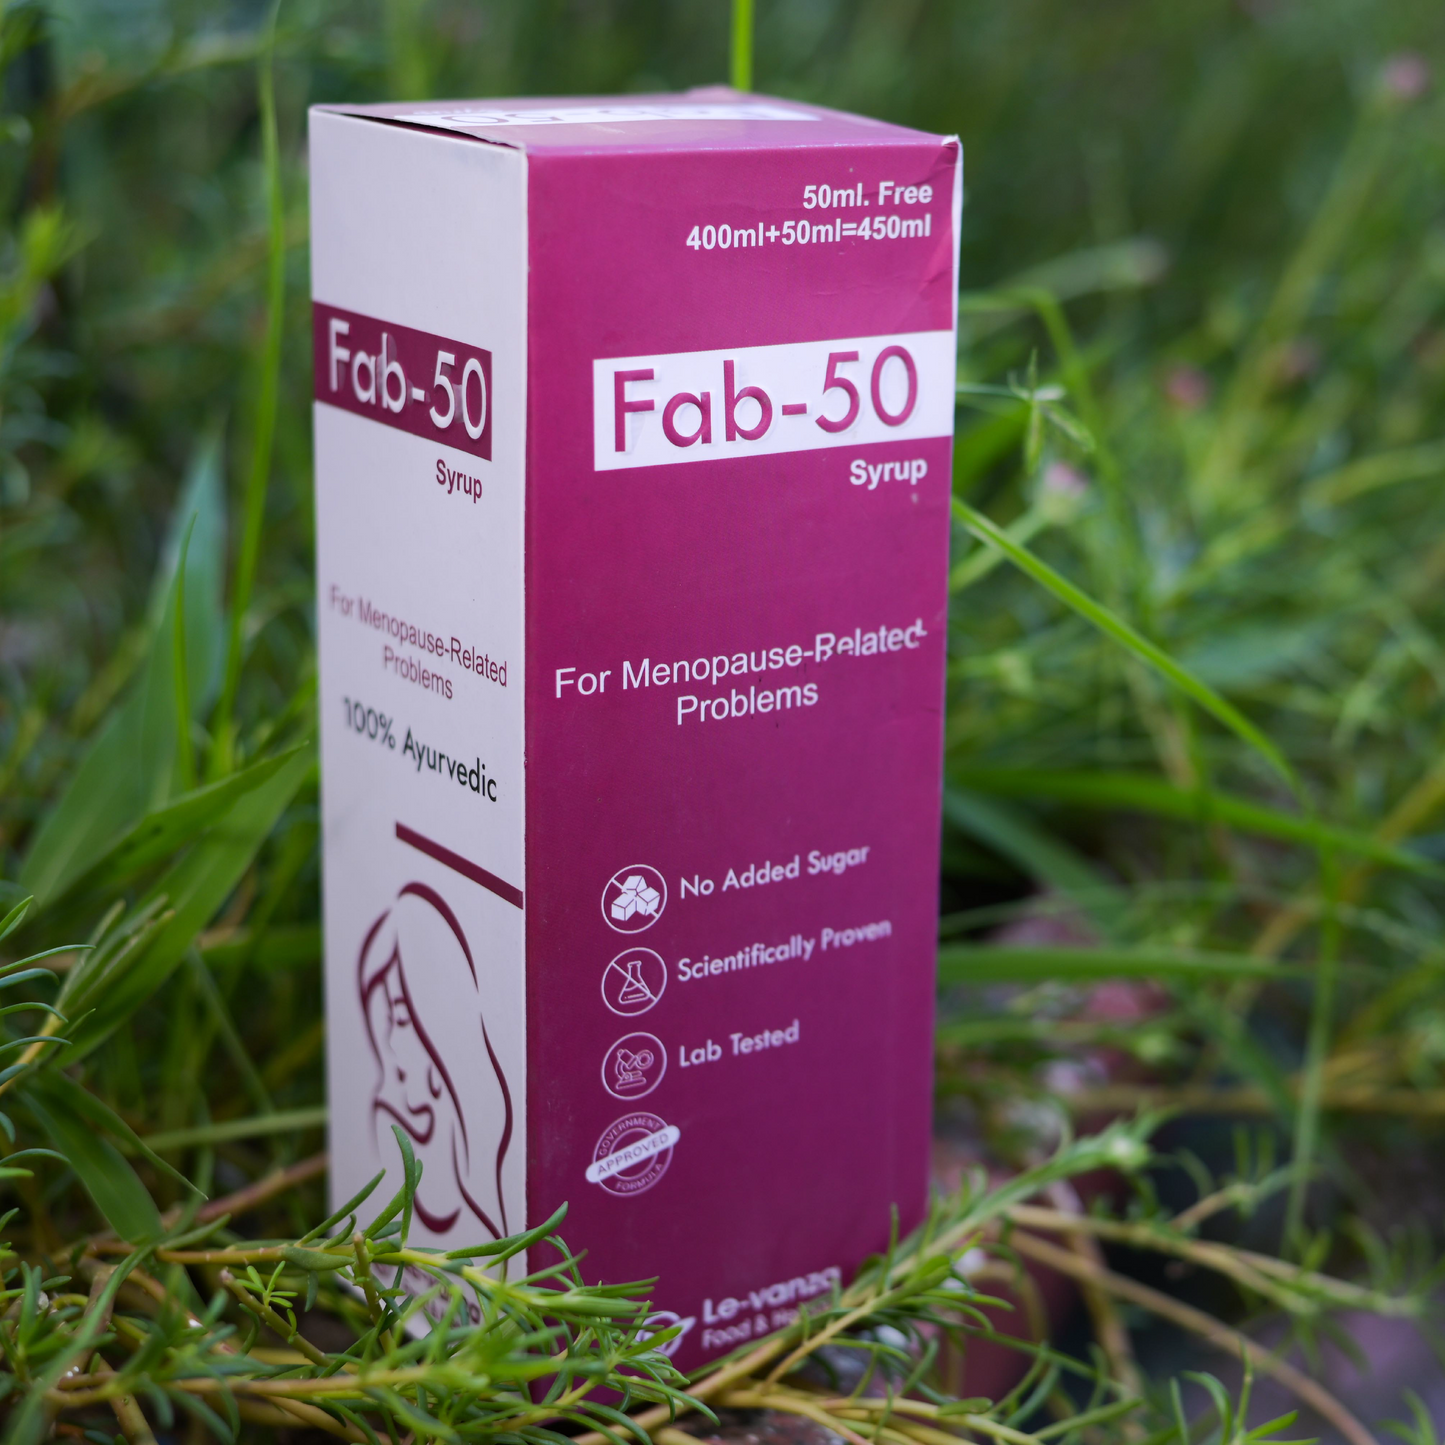 FAb-50 Syrup 400ml Menopause Supplements For Women Pre Menopause Relief Supplement Hot Flashes Night Sweats Mood Swings + 50ml Free